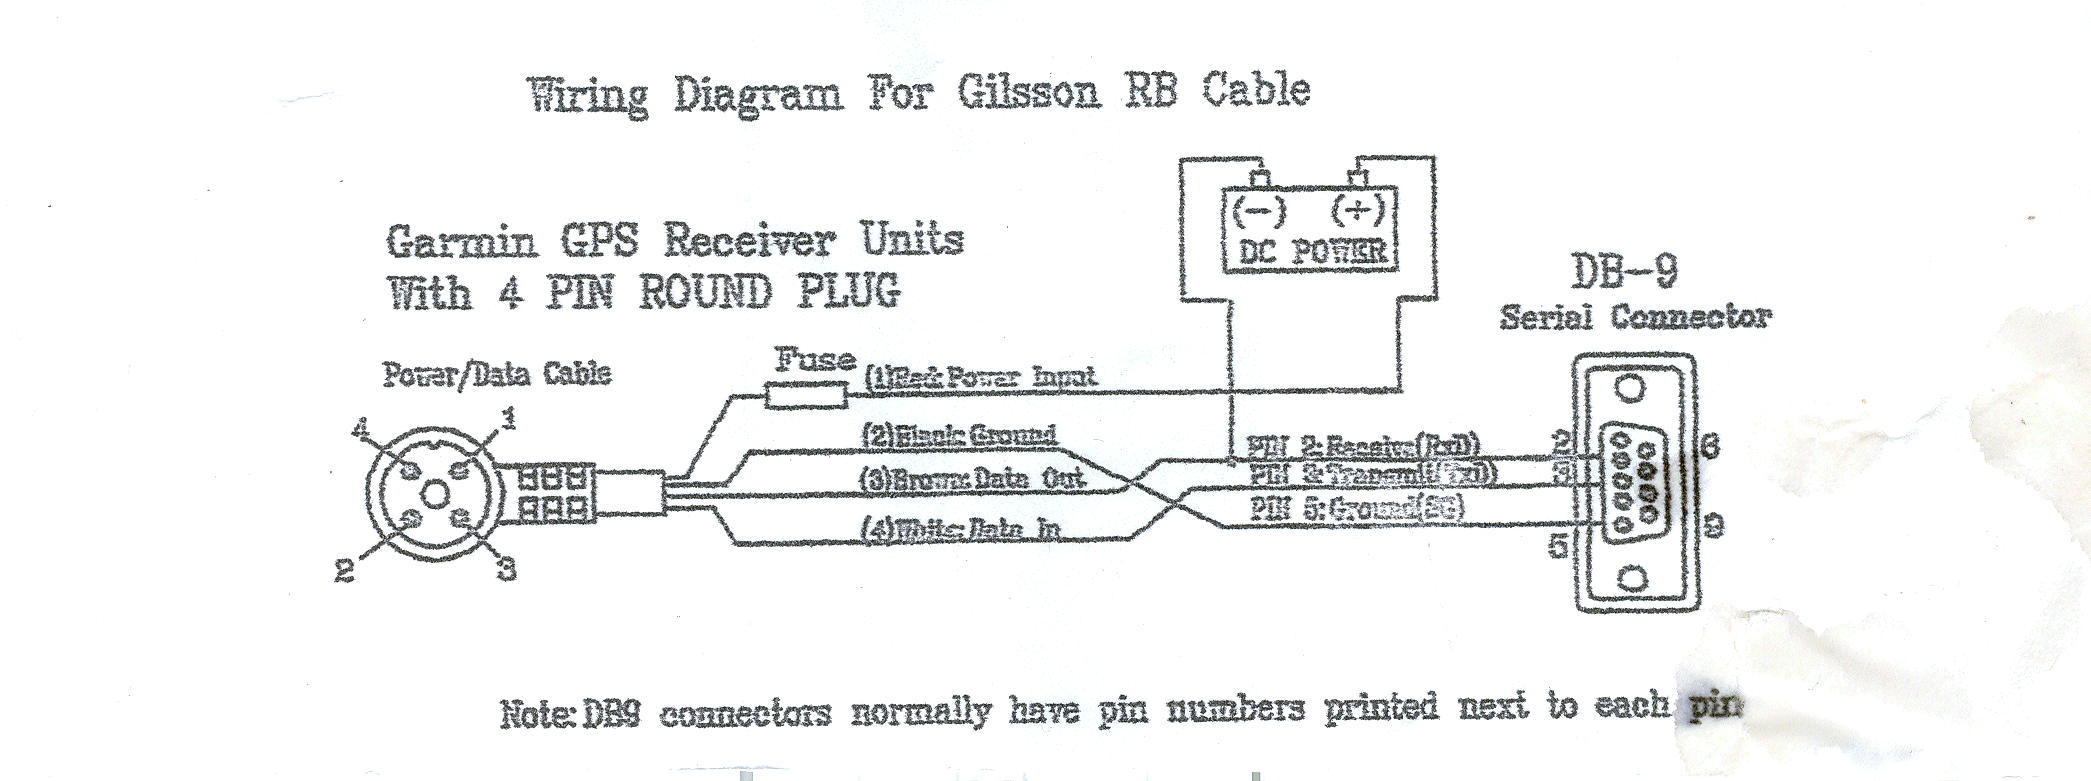 GPS Cable Diagram - Click for larger view